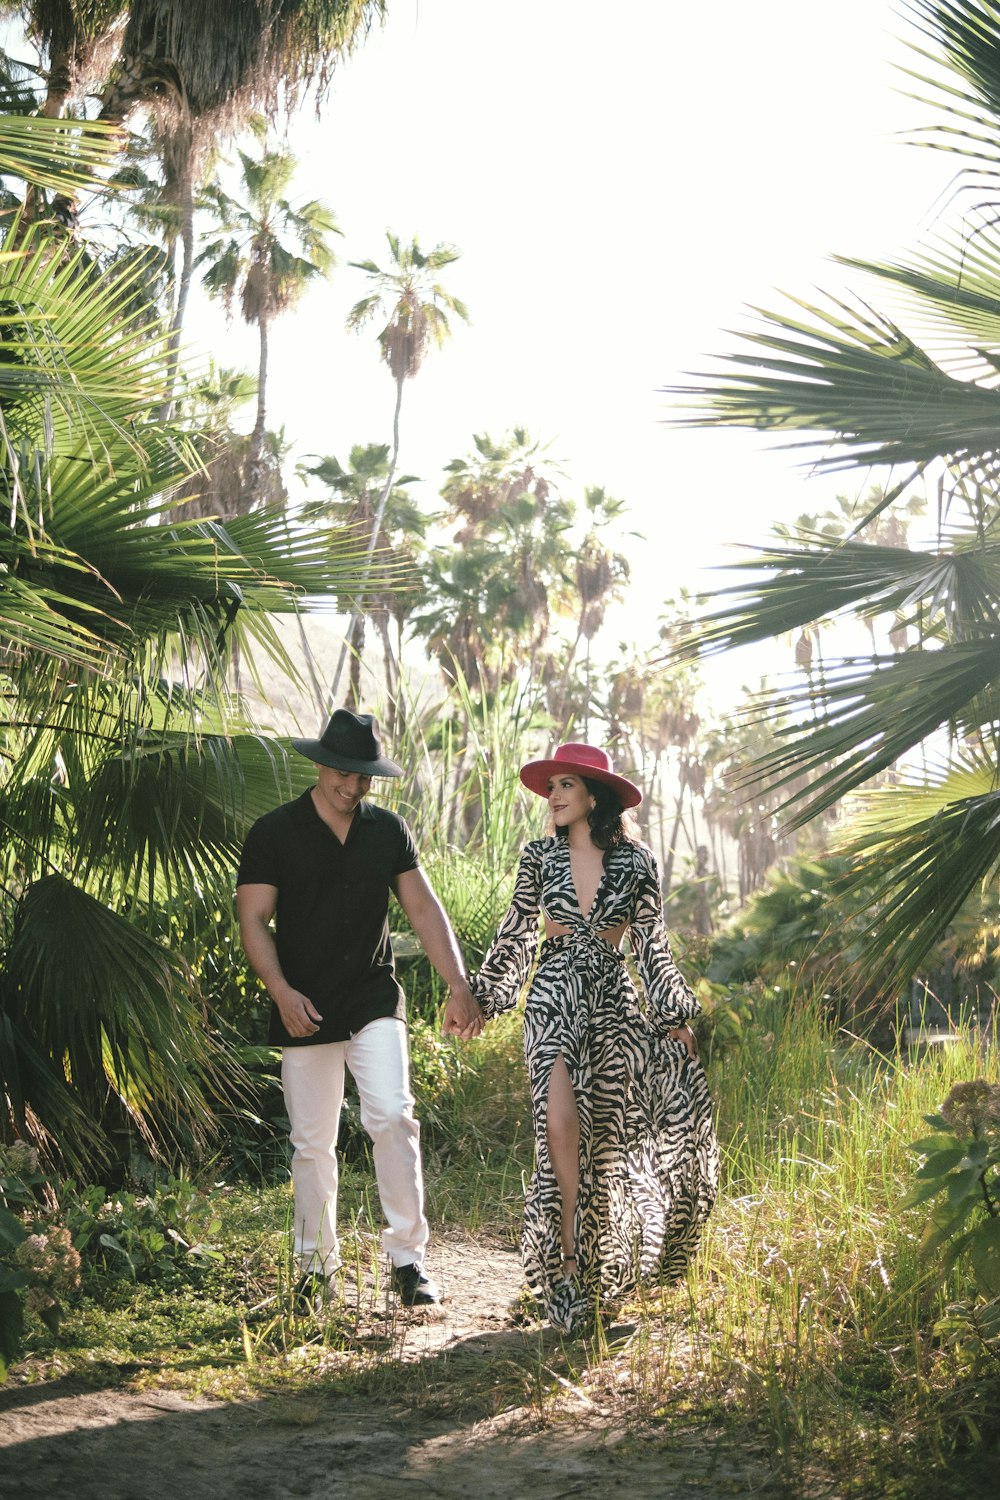 a man and woman walking on a path between palm trees